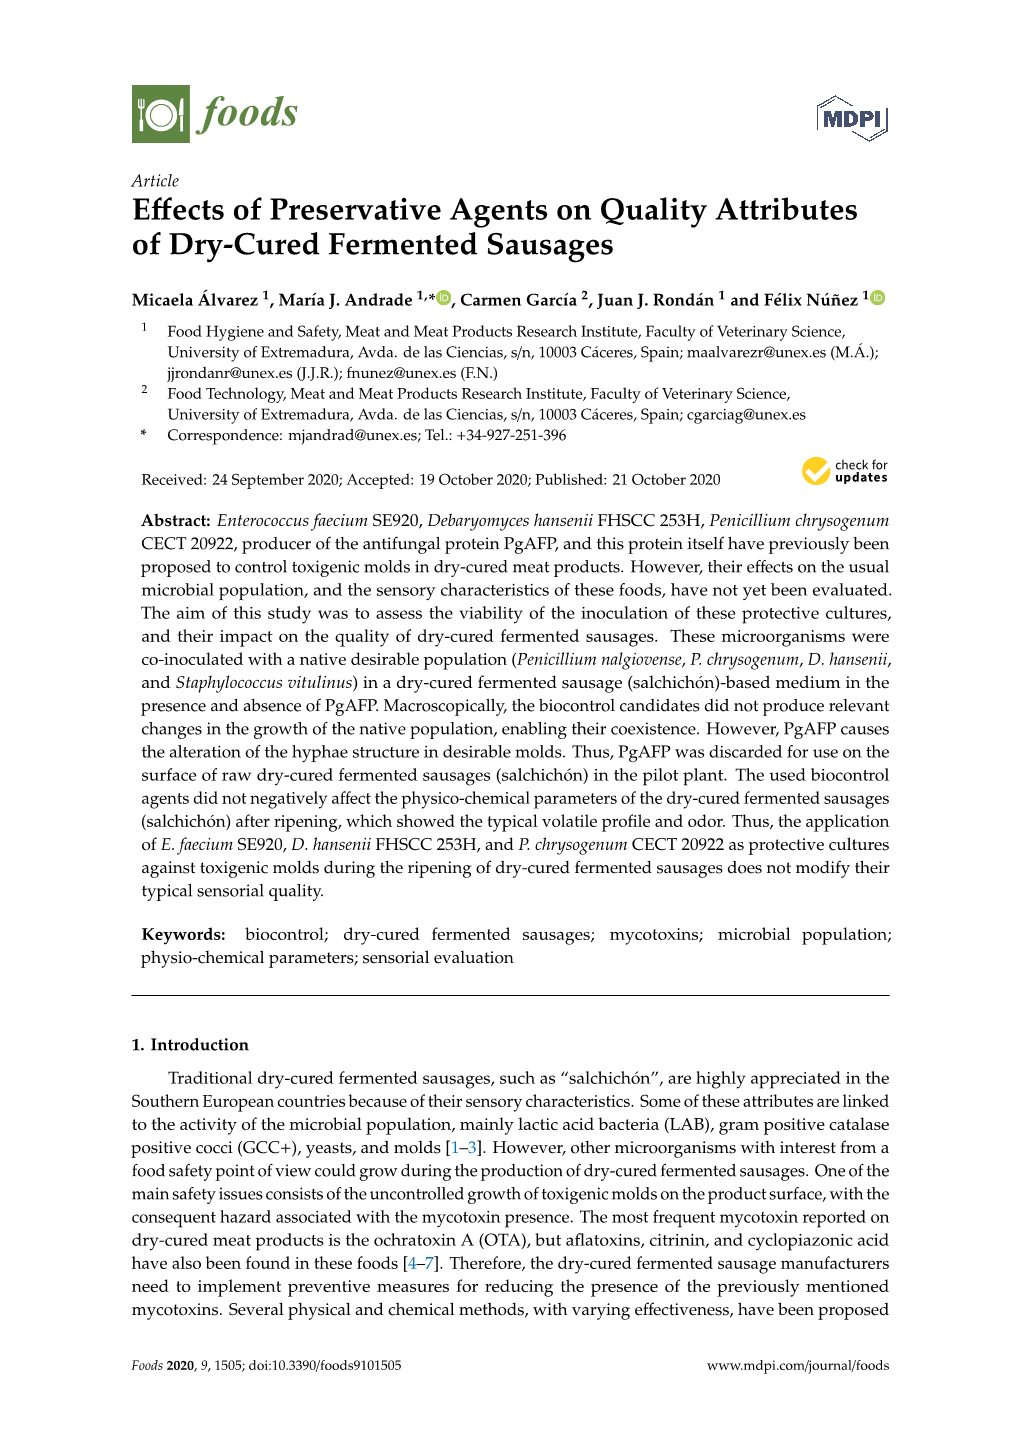 Effects of Preservative Agents on Quality Attributes of Dry-Cured Fermented Sausages